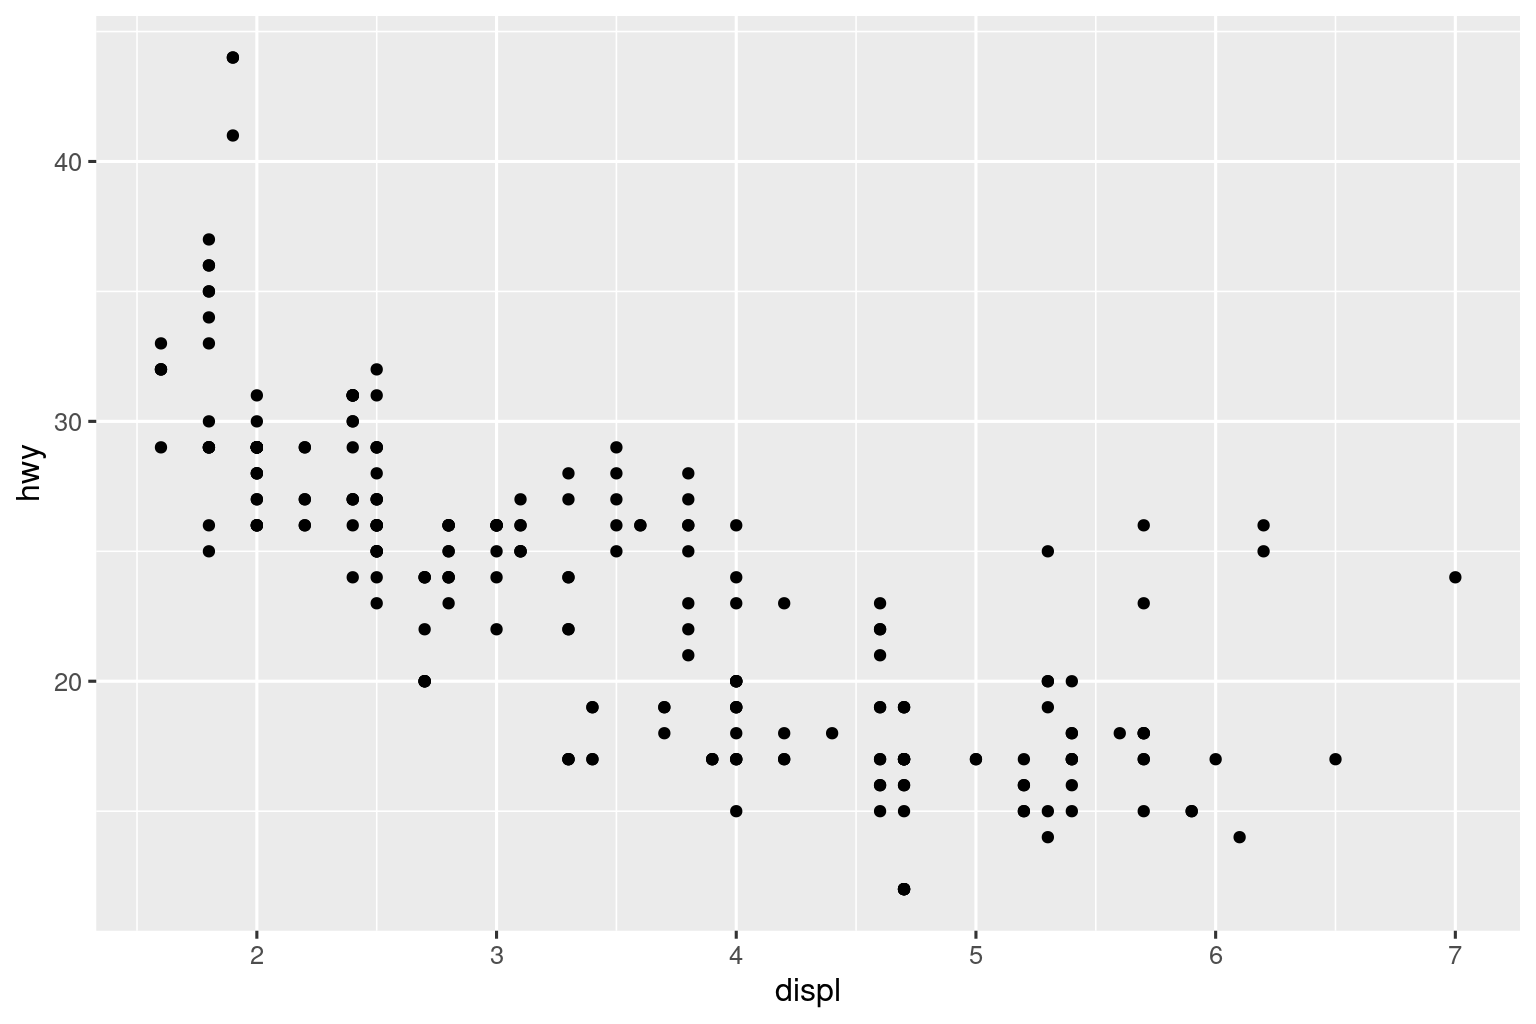 Scatterplot of highway mileage vs. displacement of cars, where the points are even smaller than in the previous plot and the axis text and labels are even smallter than the surrounding text.